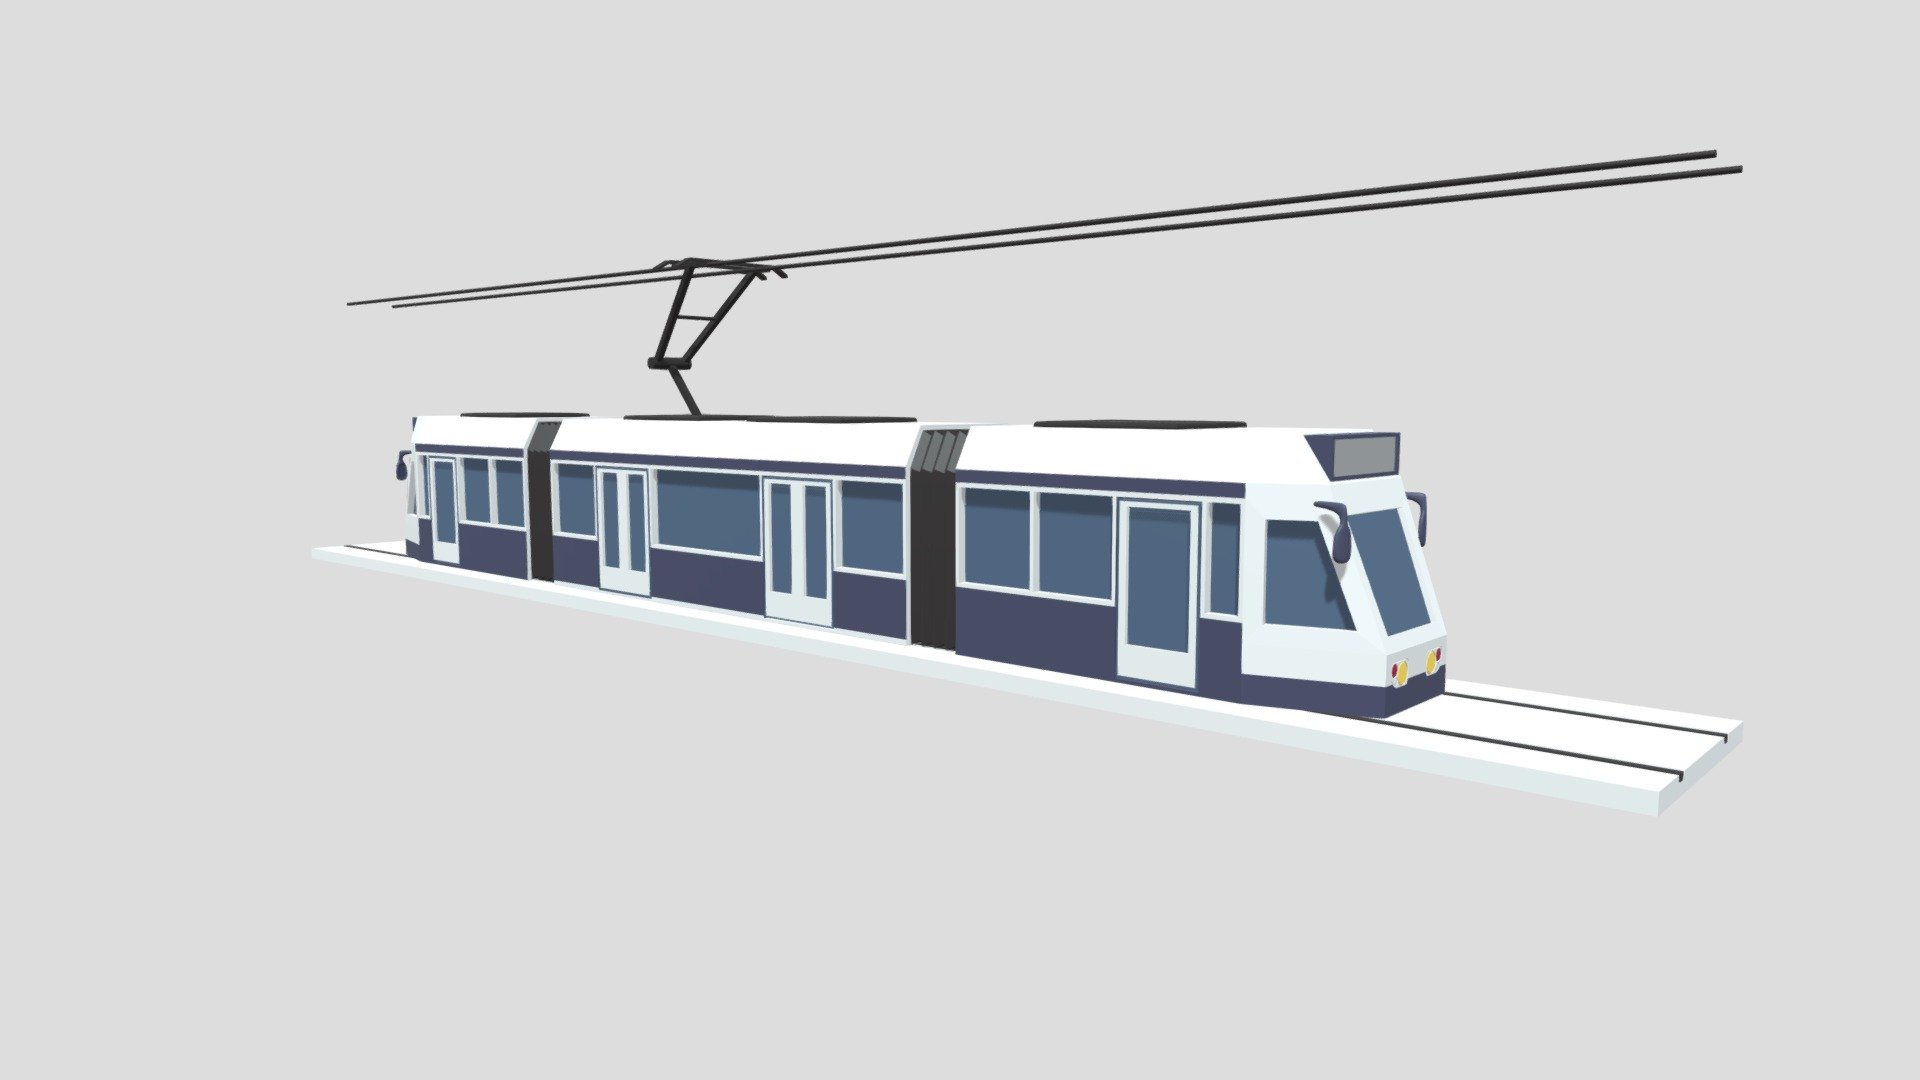 -LowPoly Cartoon Tram.

-This product contains 51 models.

-This product was created in Blender 2.8.

-Total vertices: 9,722 Total polygons: 7,637.

-Formats: blend, fbx, obj, c4d, dae, fbx.

-We hope you enjoy this model.

-Thank you 3d model